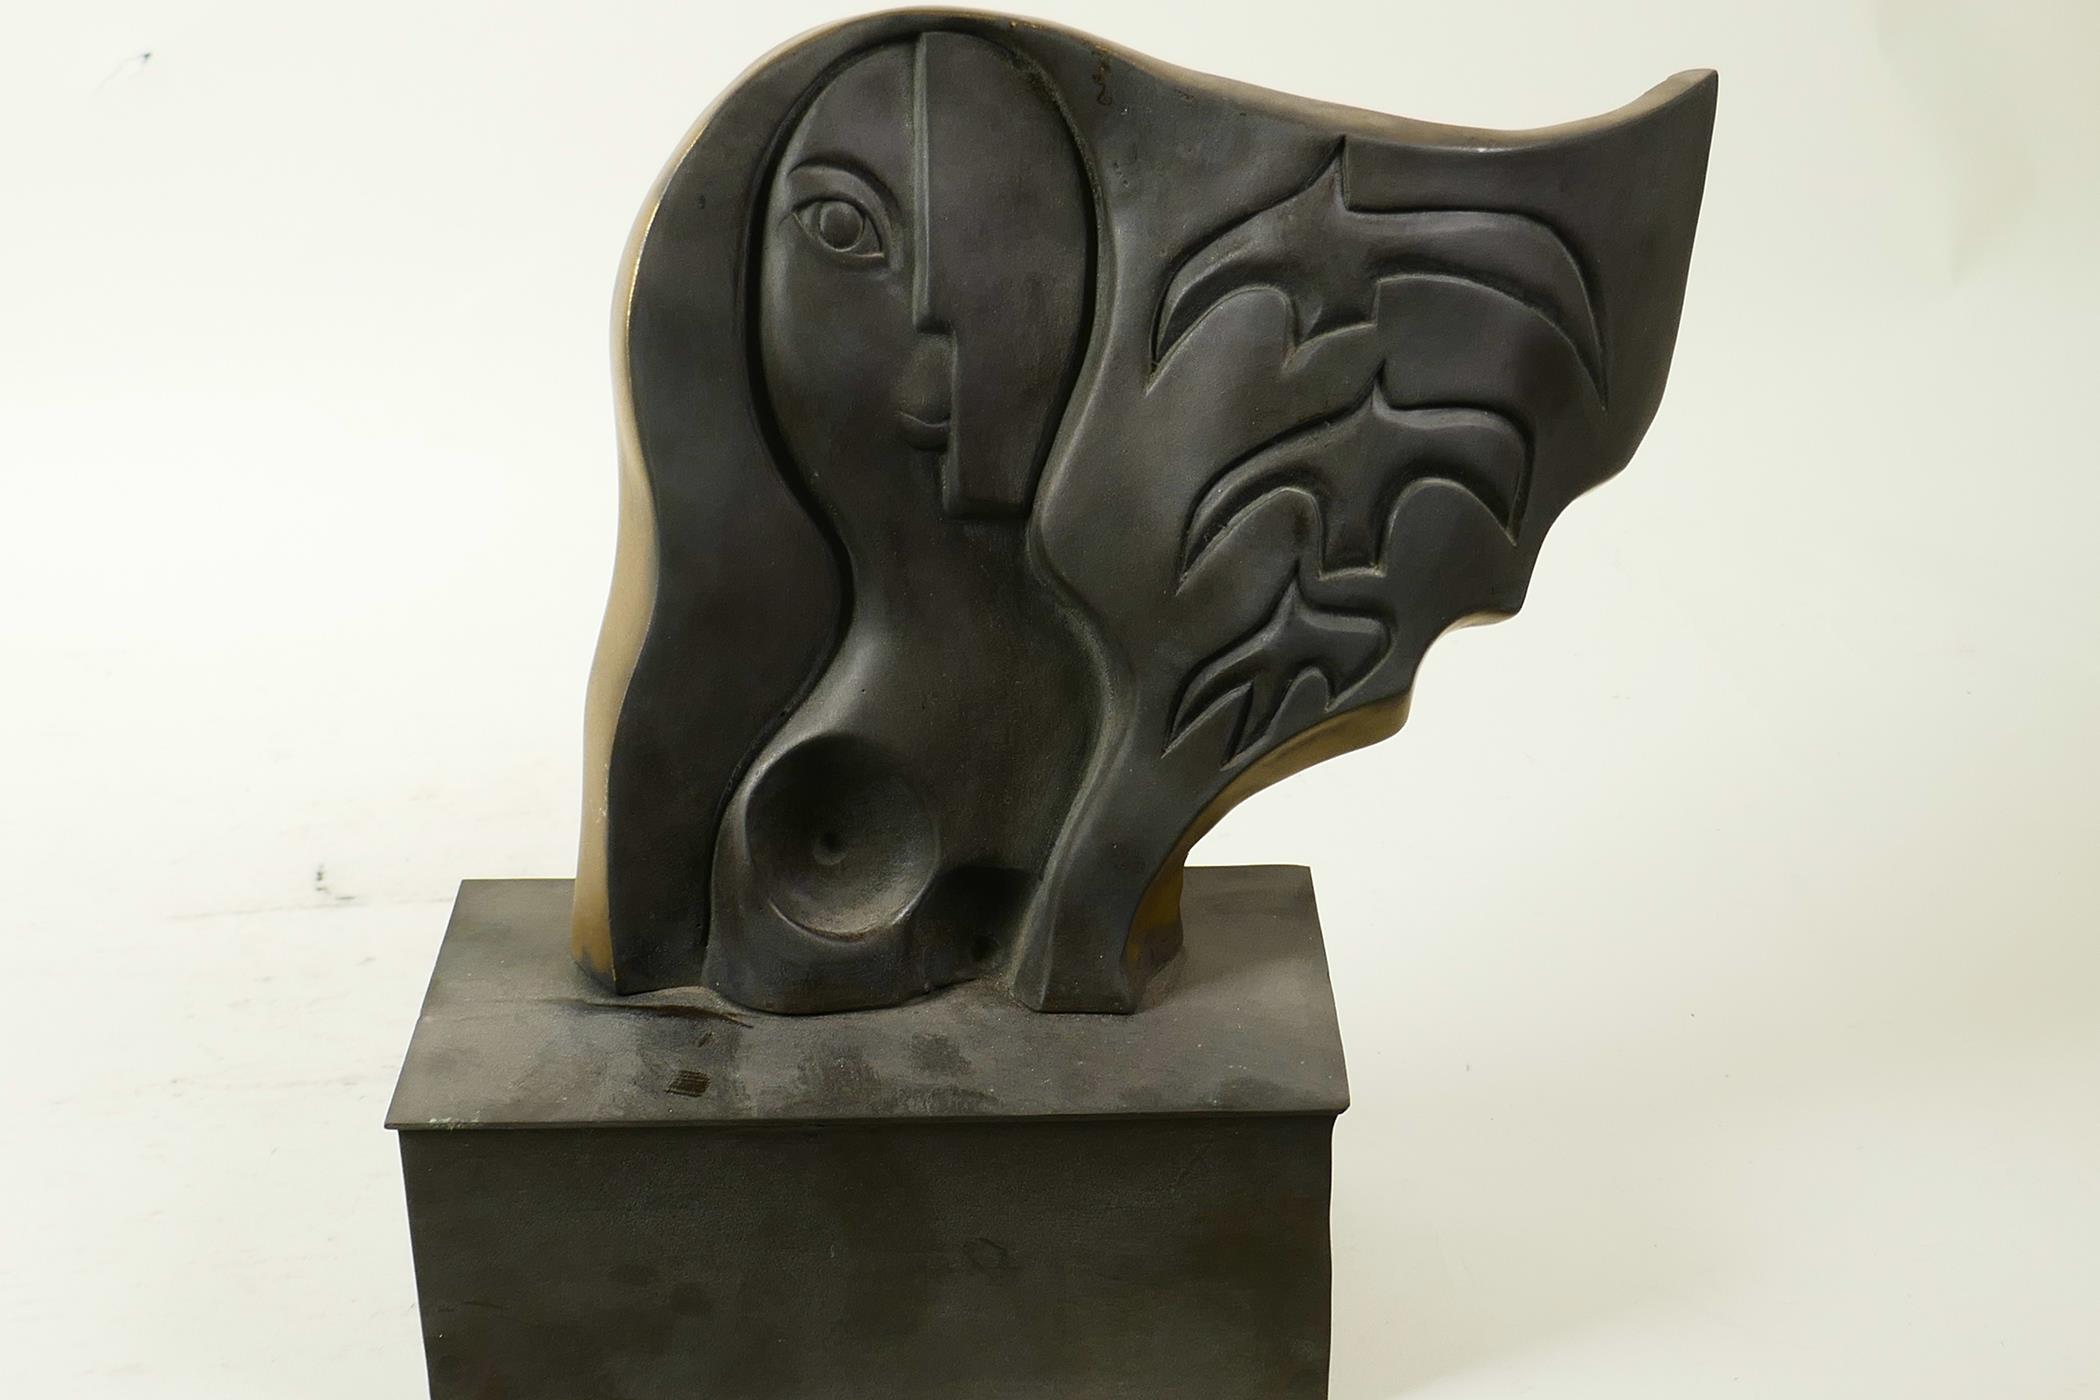 A modernist pressed bronze sculpture in the style of Picasso on a rectangular plinth, 9" high - Image 4 of 4